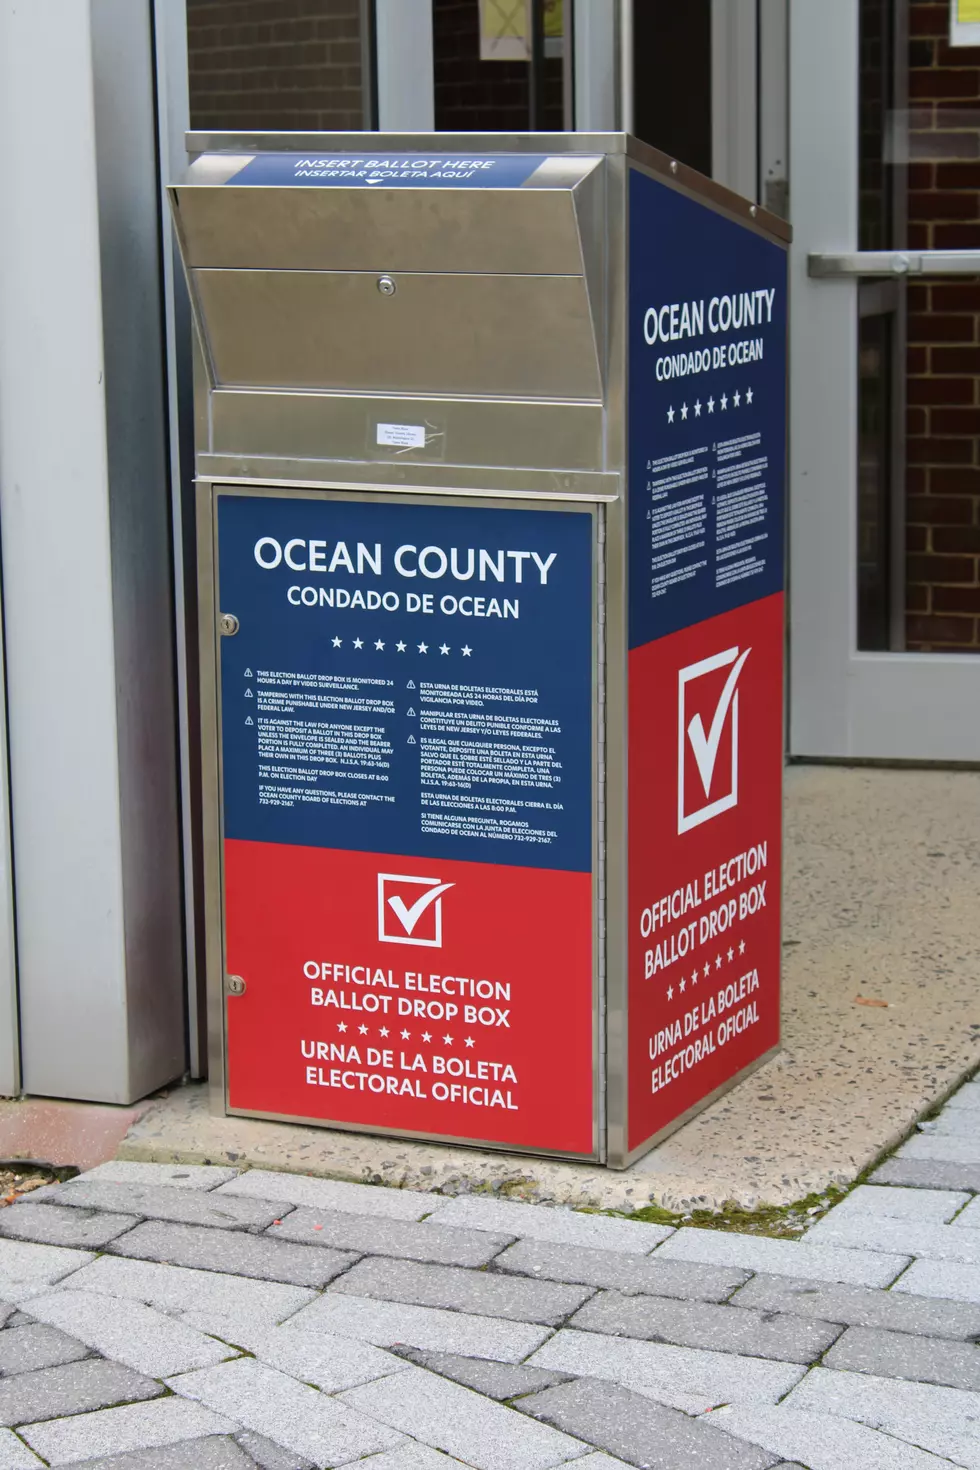 Have You Wondered How Often New Jersey Ballot Drop Boxes Are Emptied?